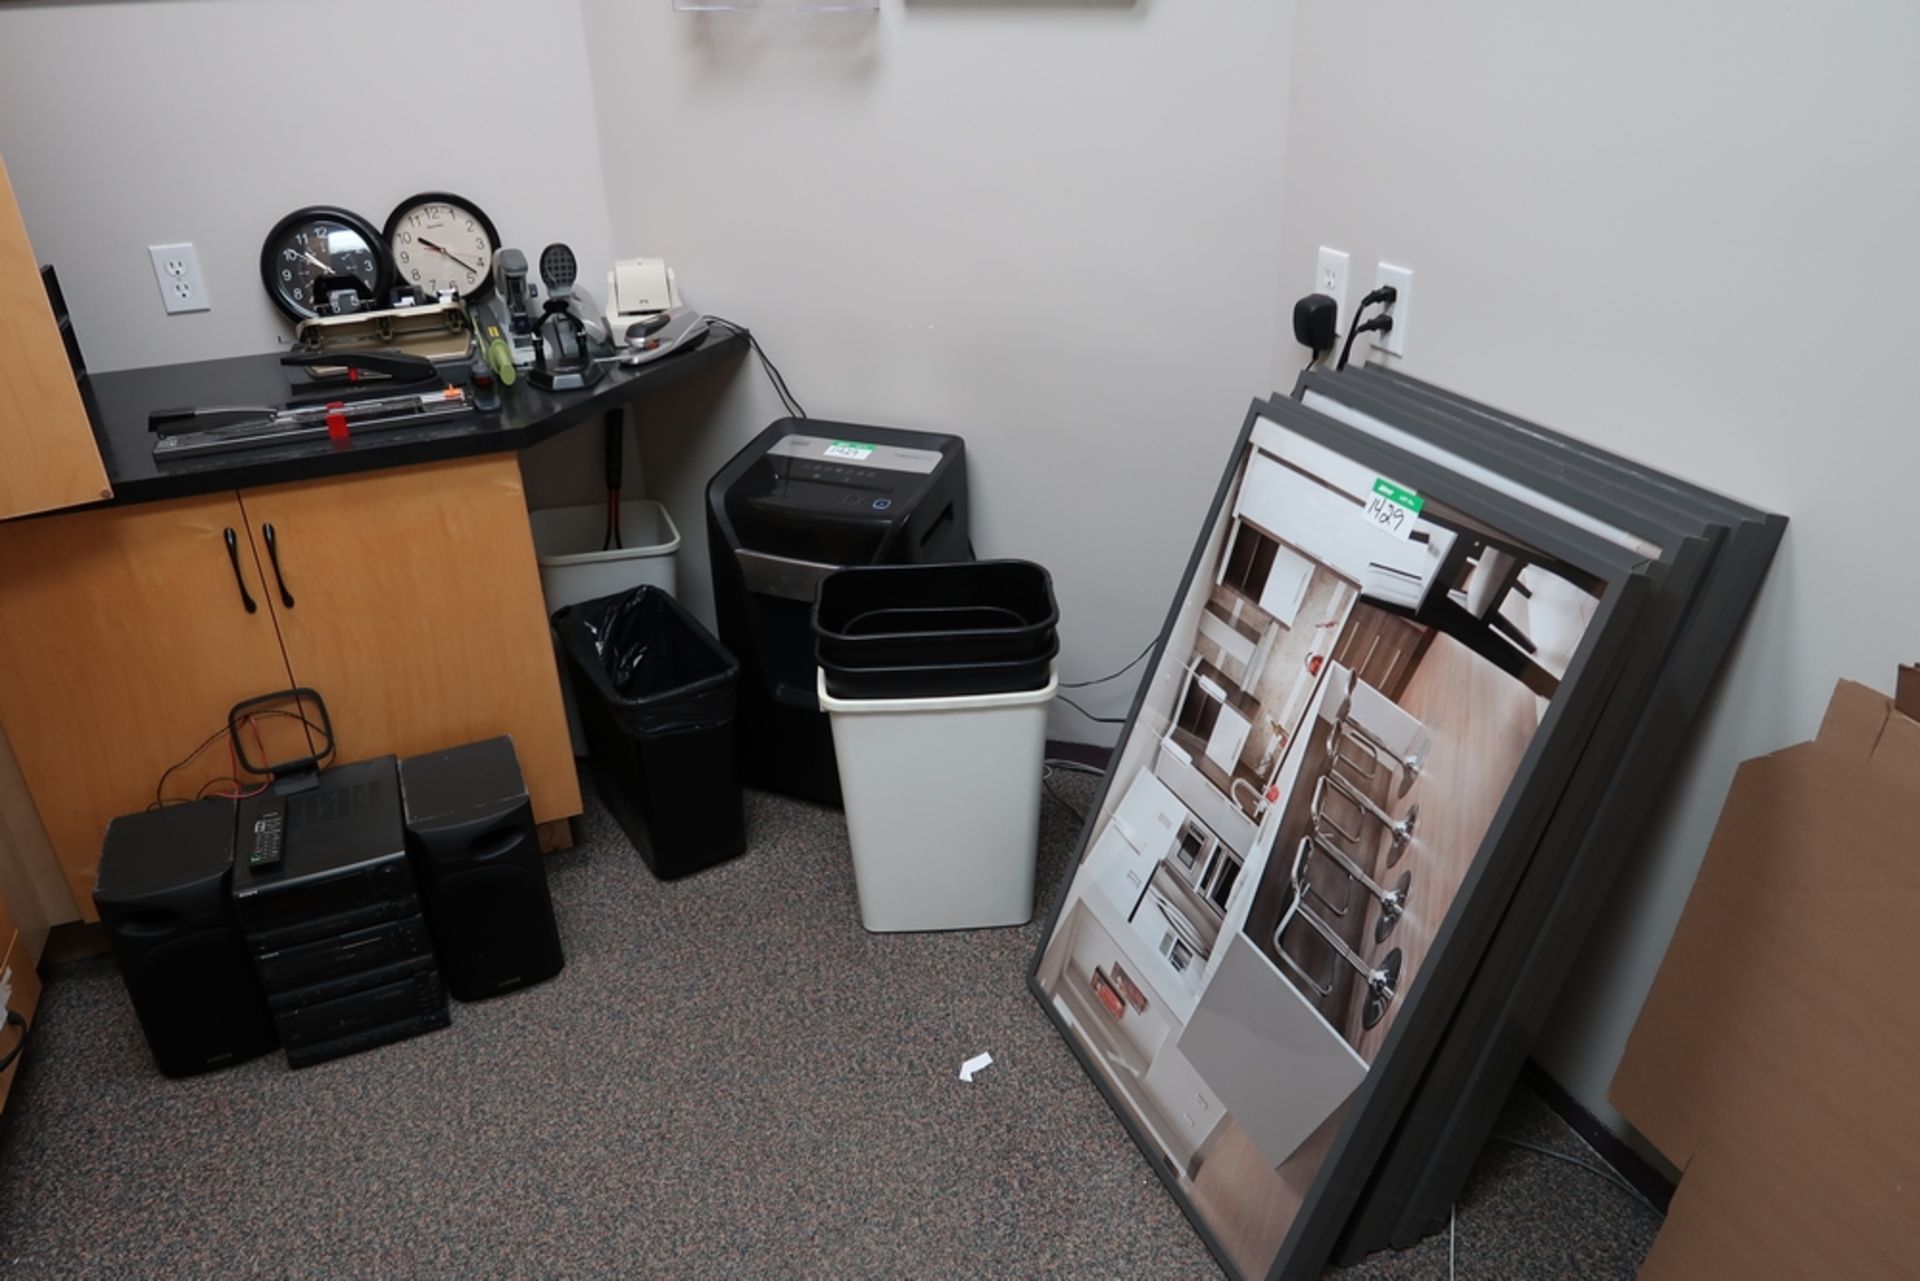 CONTENTS OF OFFICE - 4 FILING CABINETS, PAPER SHREDDER & OFFICE SUPPLIES - Image 2 of 2